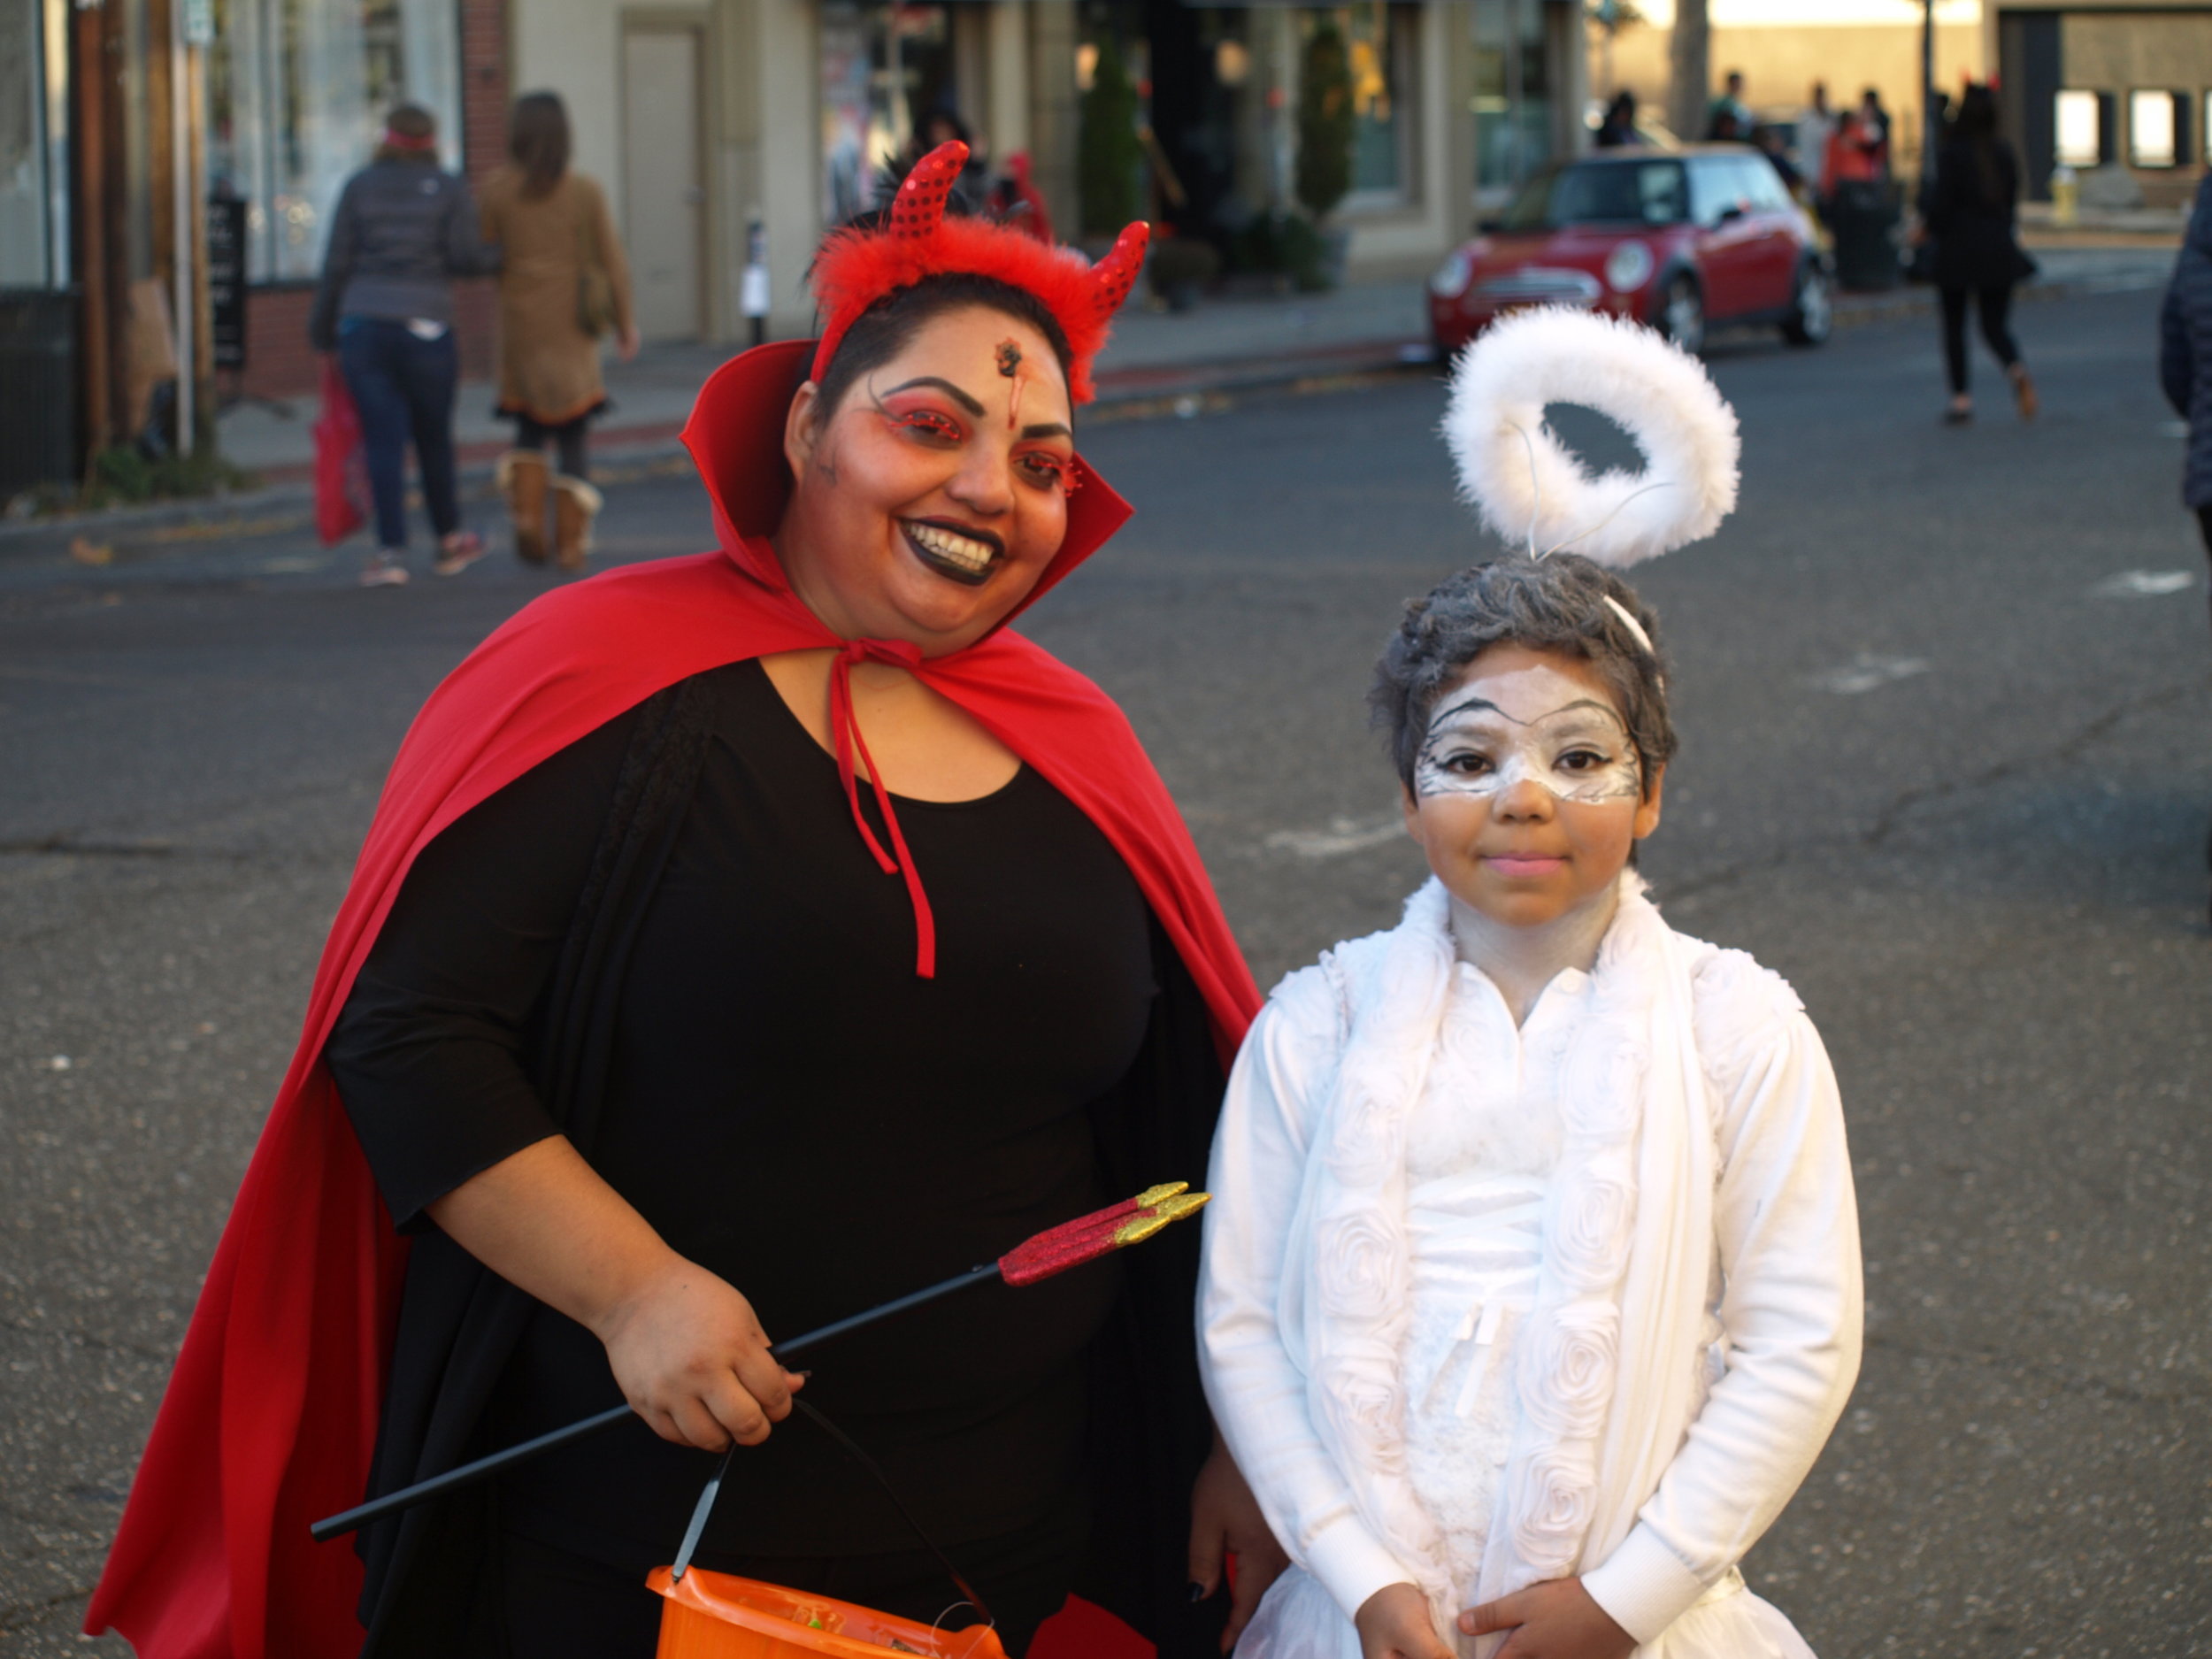   Devils and angels got to share in the Halloween spirit when merchants on Wall Street opened their doors to trick-or-treaters on Halloween. &nbsp; Long Islander News Photo/Connor Beach  